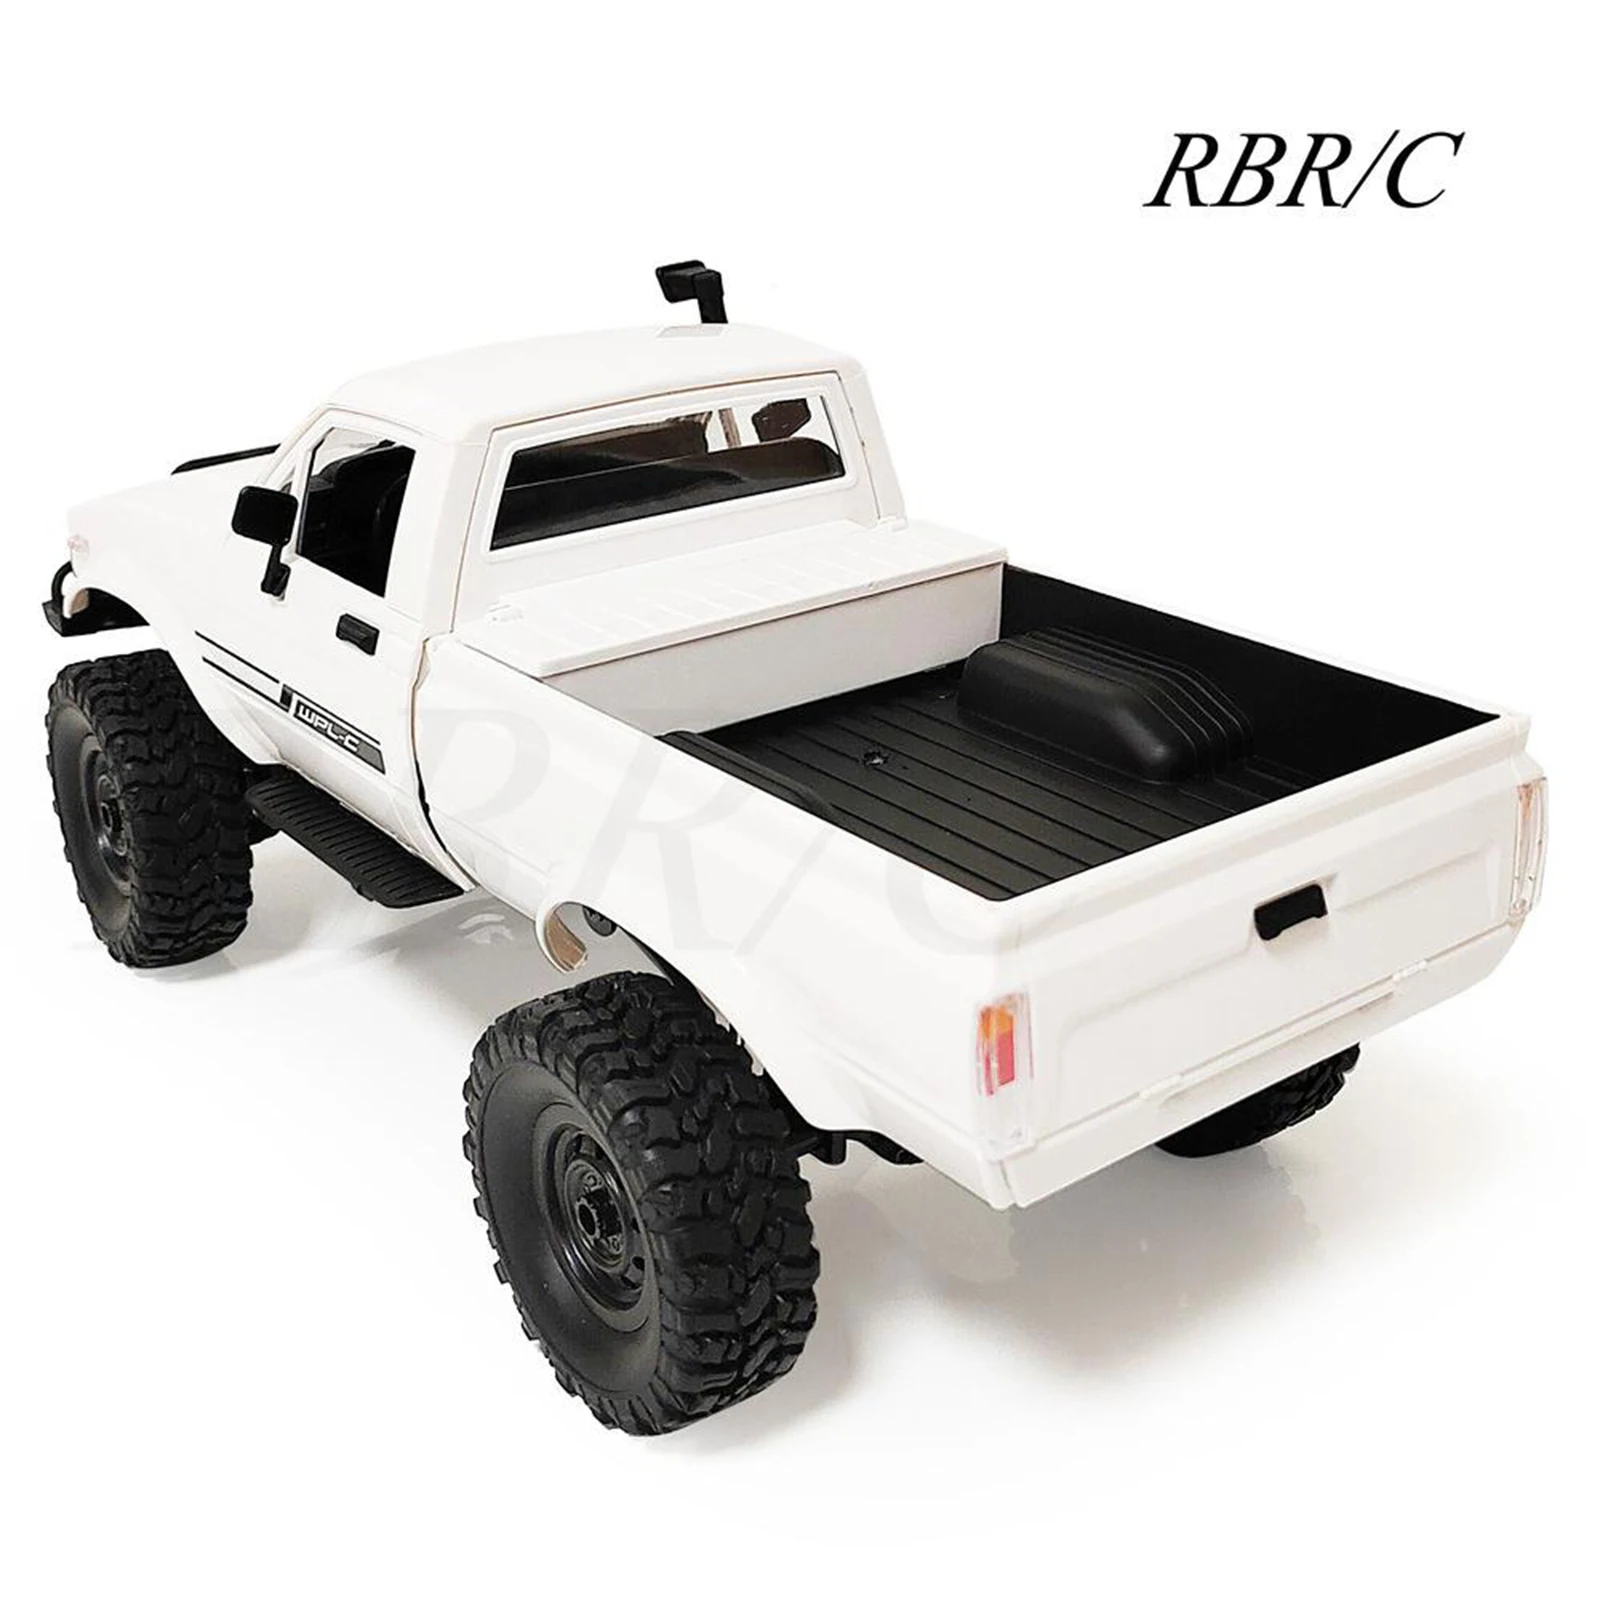 1 : 16 Scale 1:16 2.4G C24-1 kit WPL Speed Model RC Car Pickup Off-Road Truck High Speed Crawlers Vehicle for Adults Kids